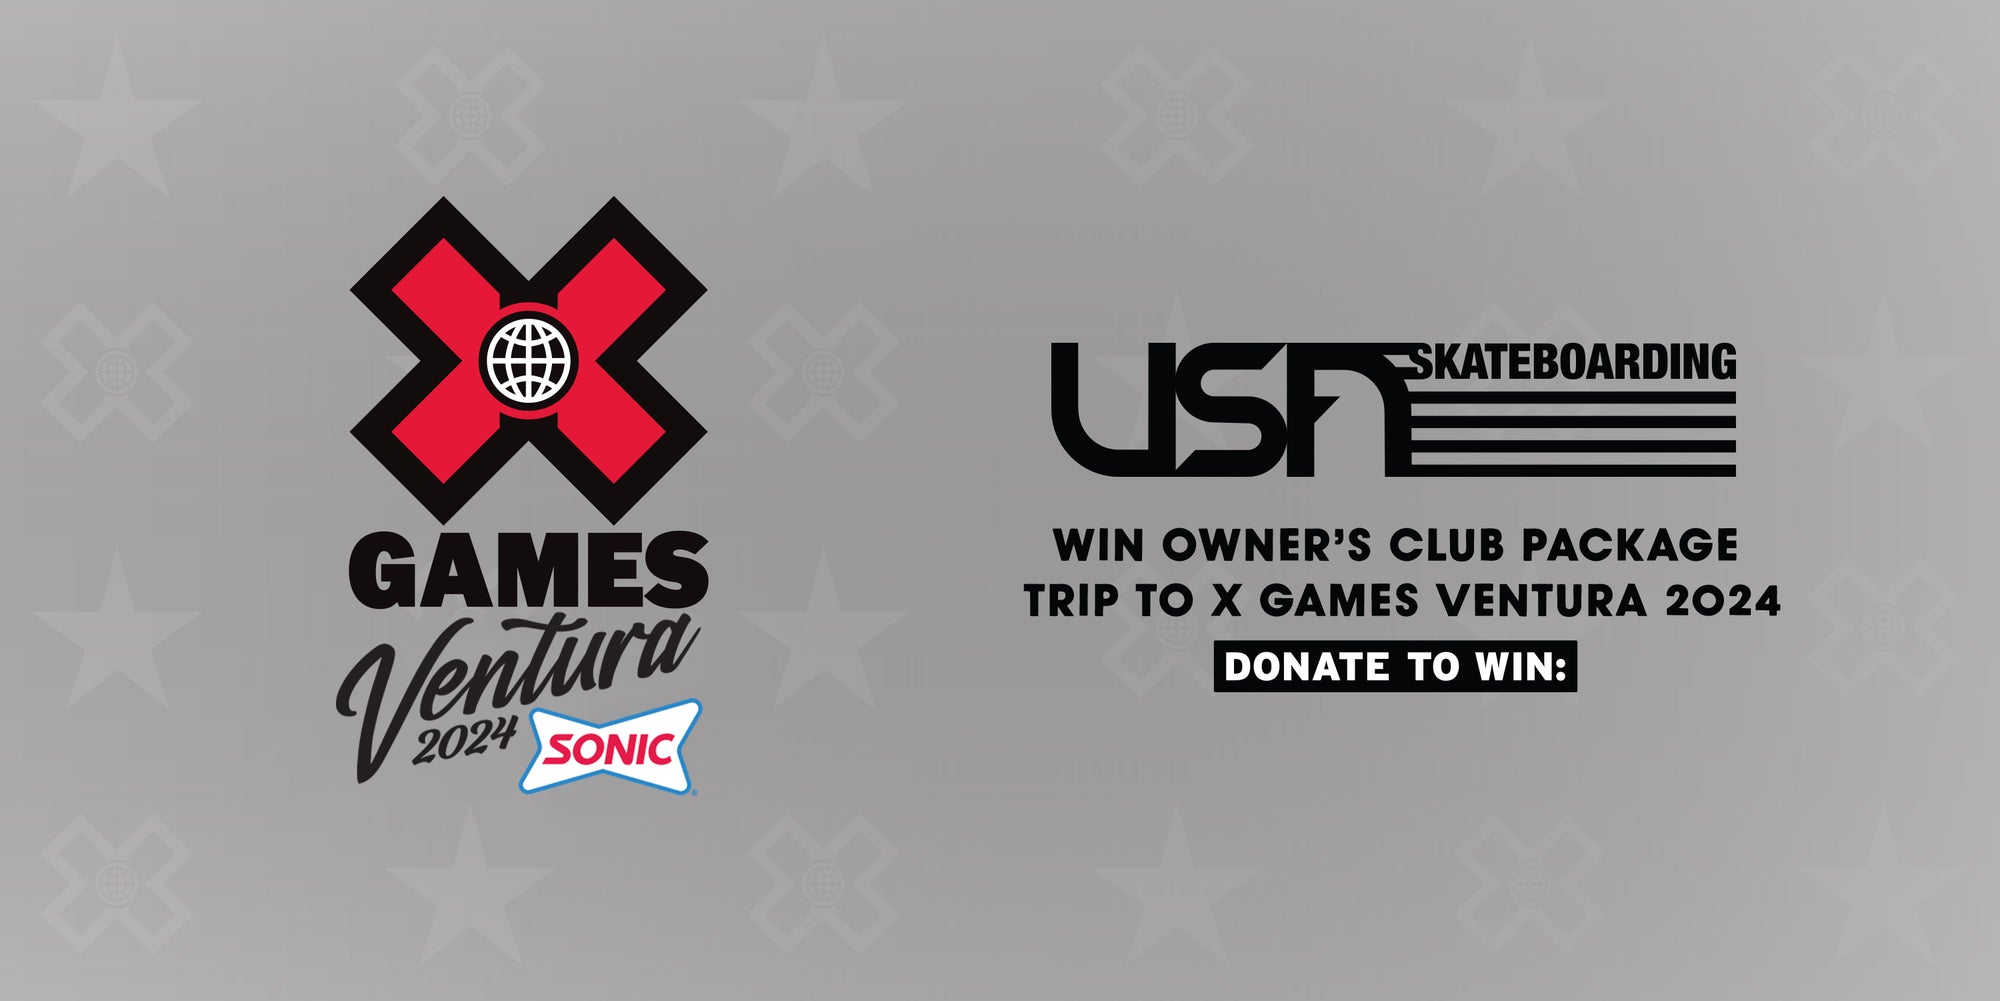 Win an Exclusive Owner’s Club Trip to X Games Ventura Presented by SONIC